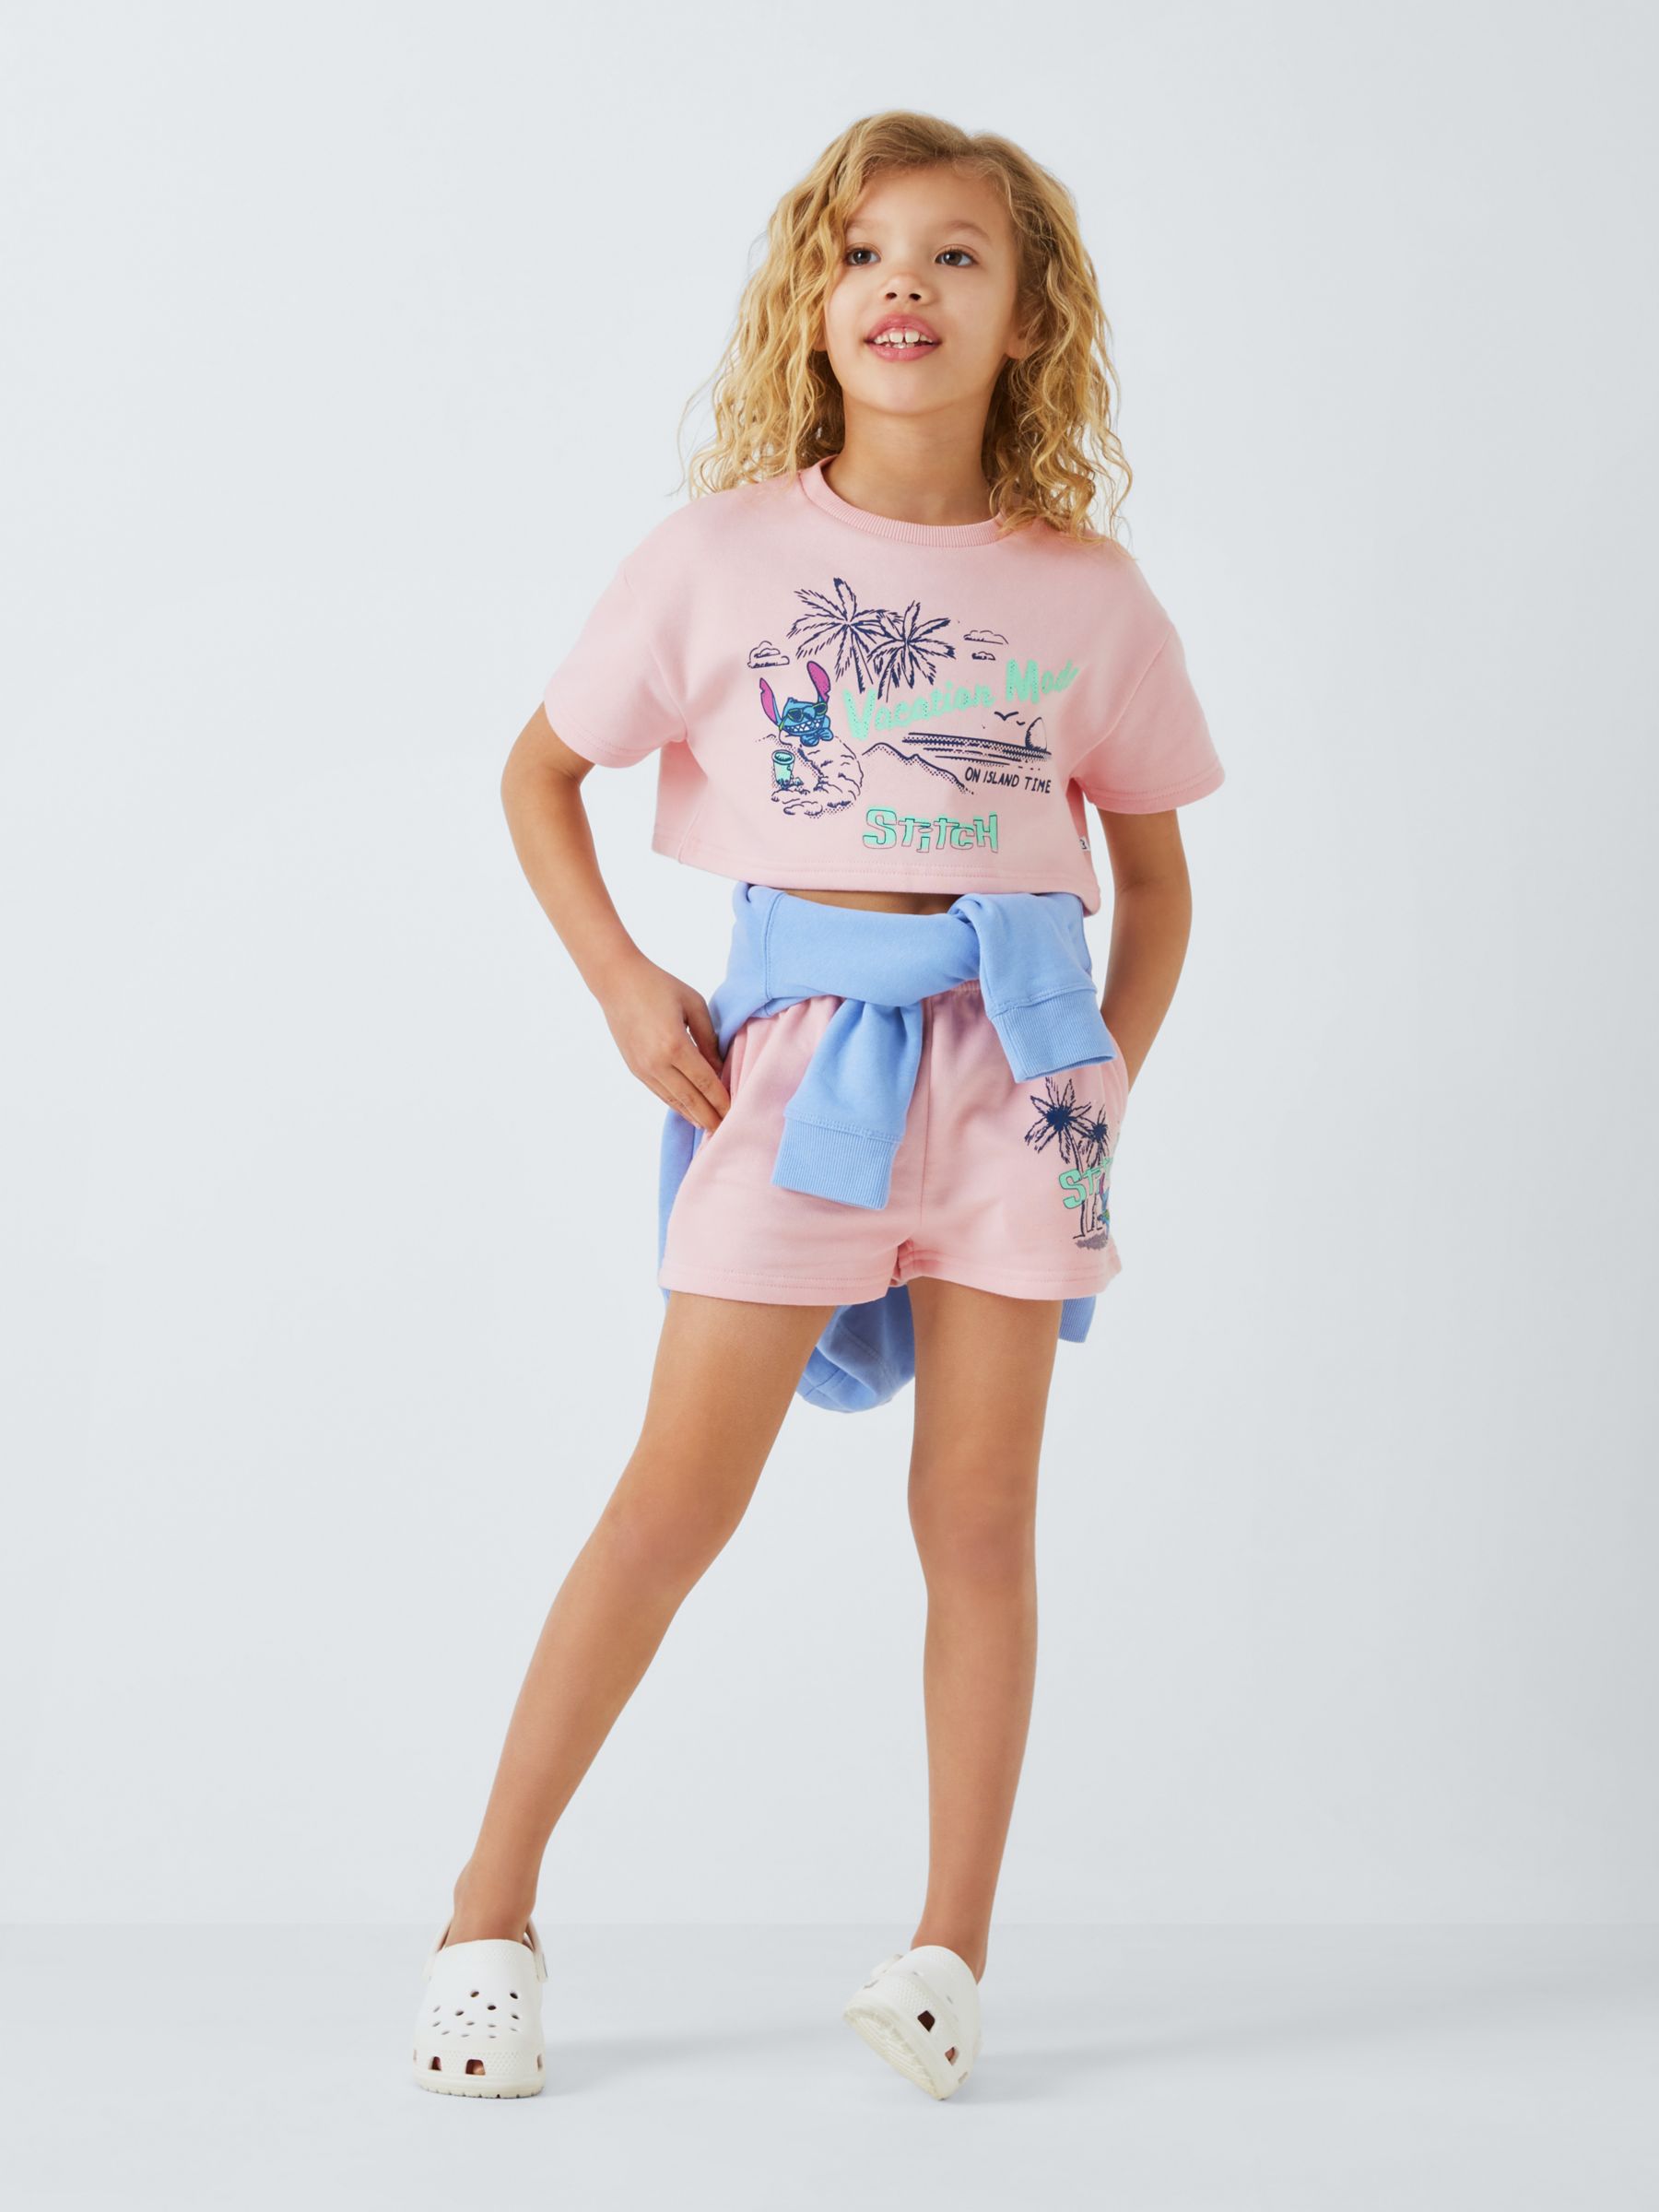 Buy Brand Threads Kids' Disney Lilo and Stitch Boxy Top & Shorts Set, Pink Online at johnlewis.com